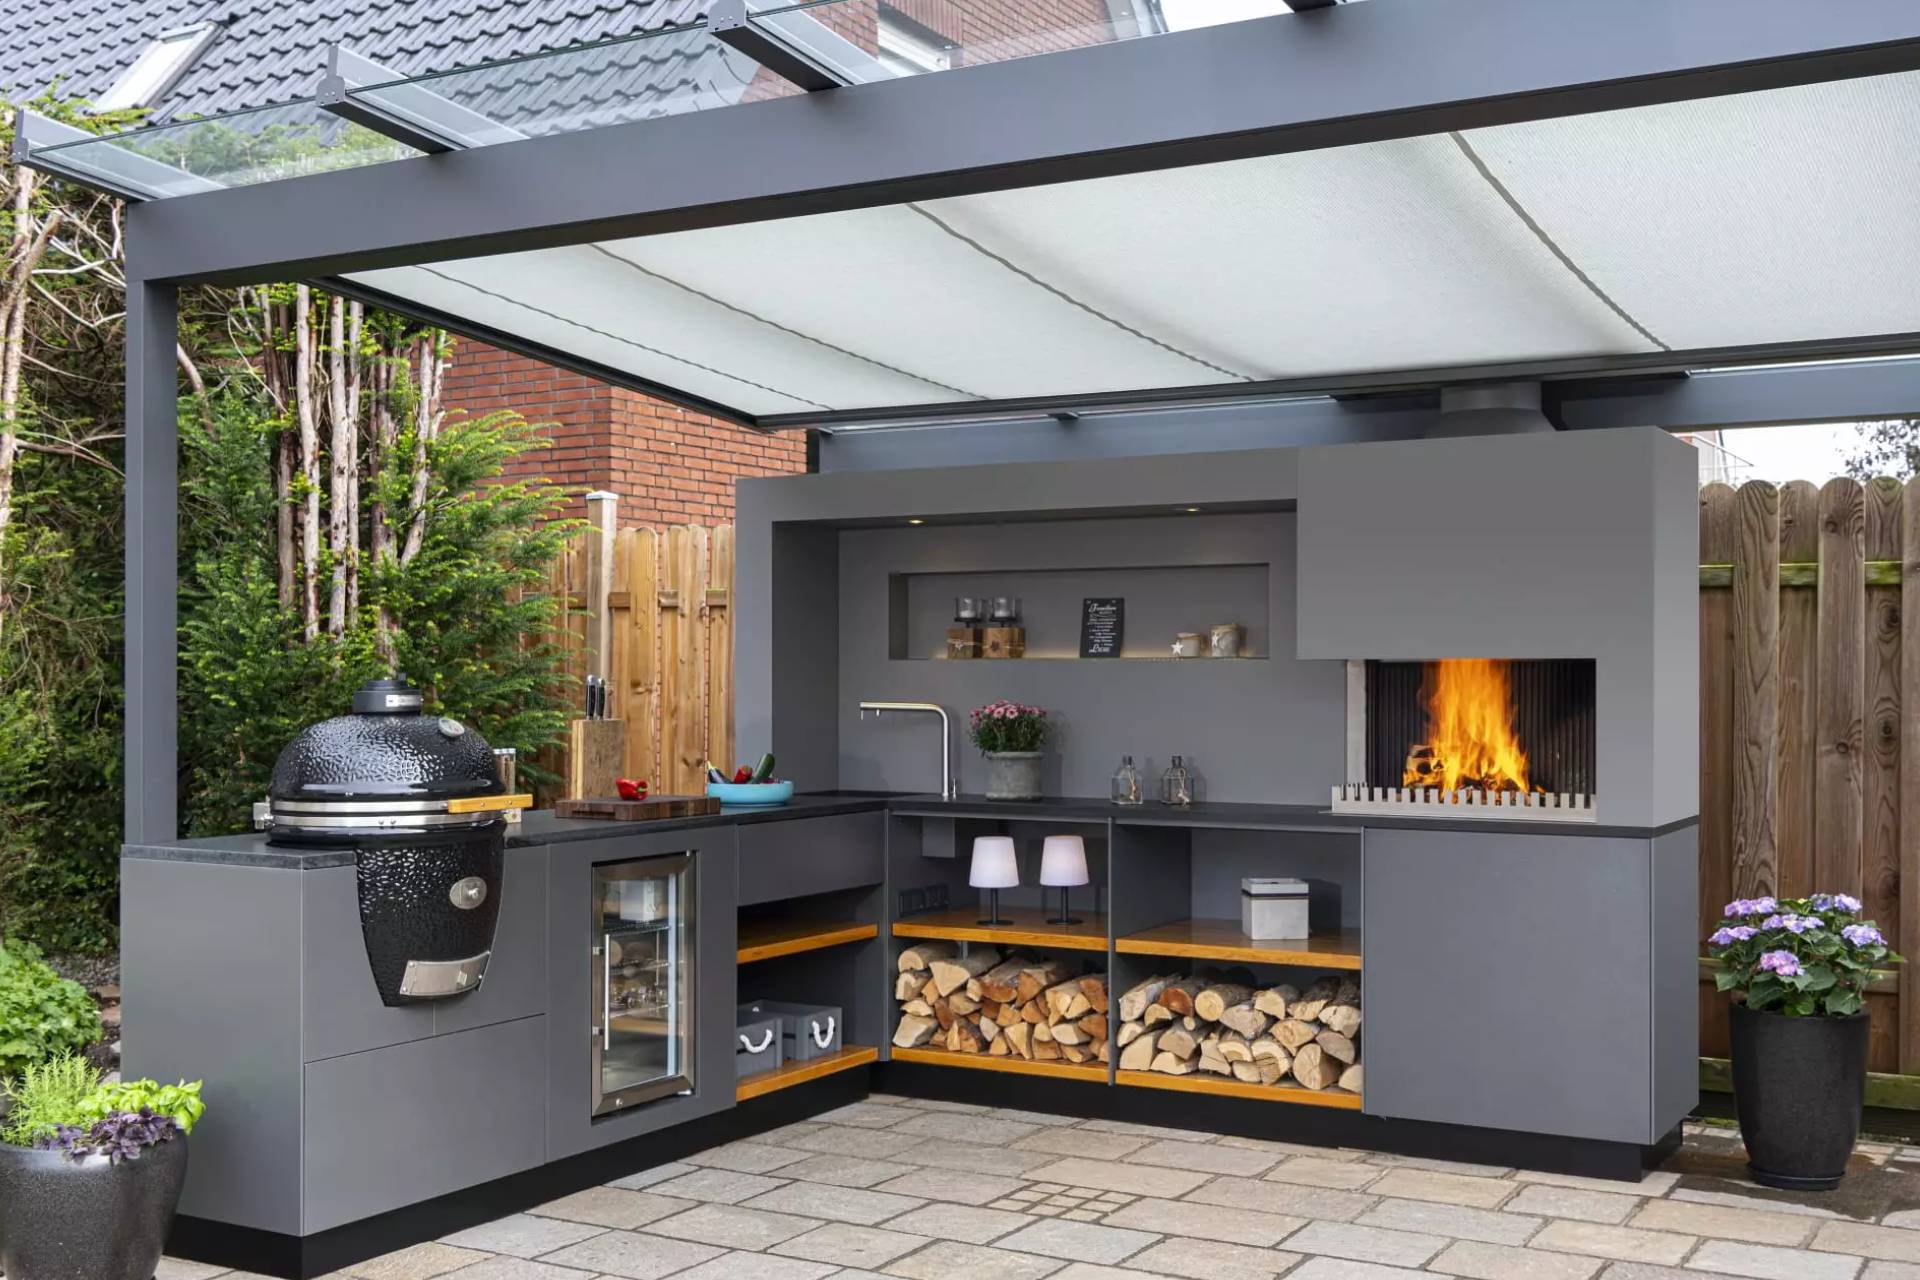 What Are Some Great Benefits Of Owning An Outdoor Kitchen?